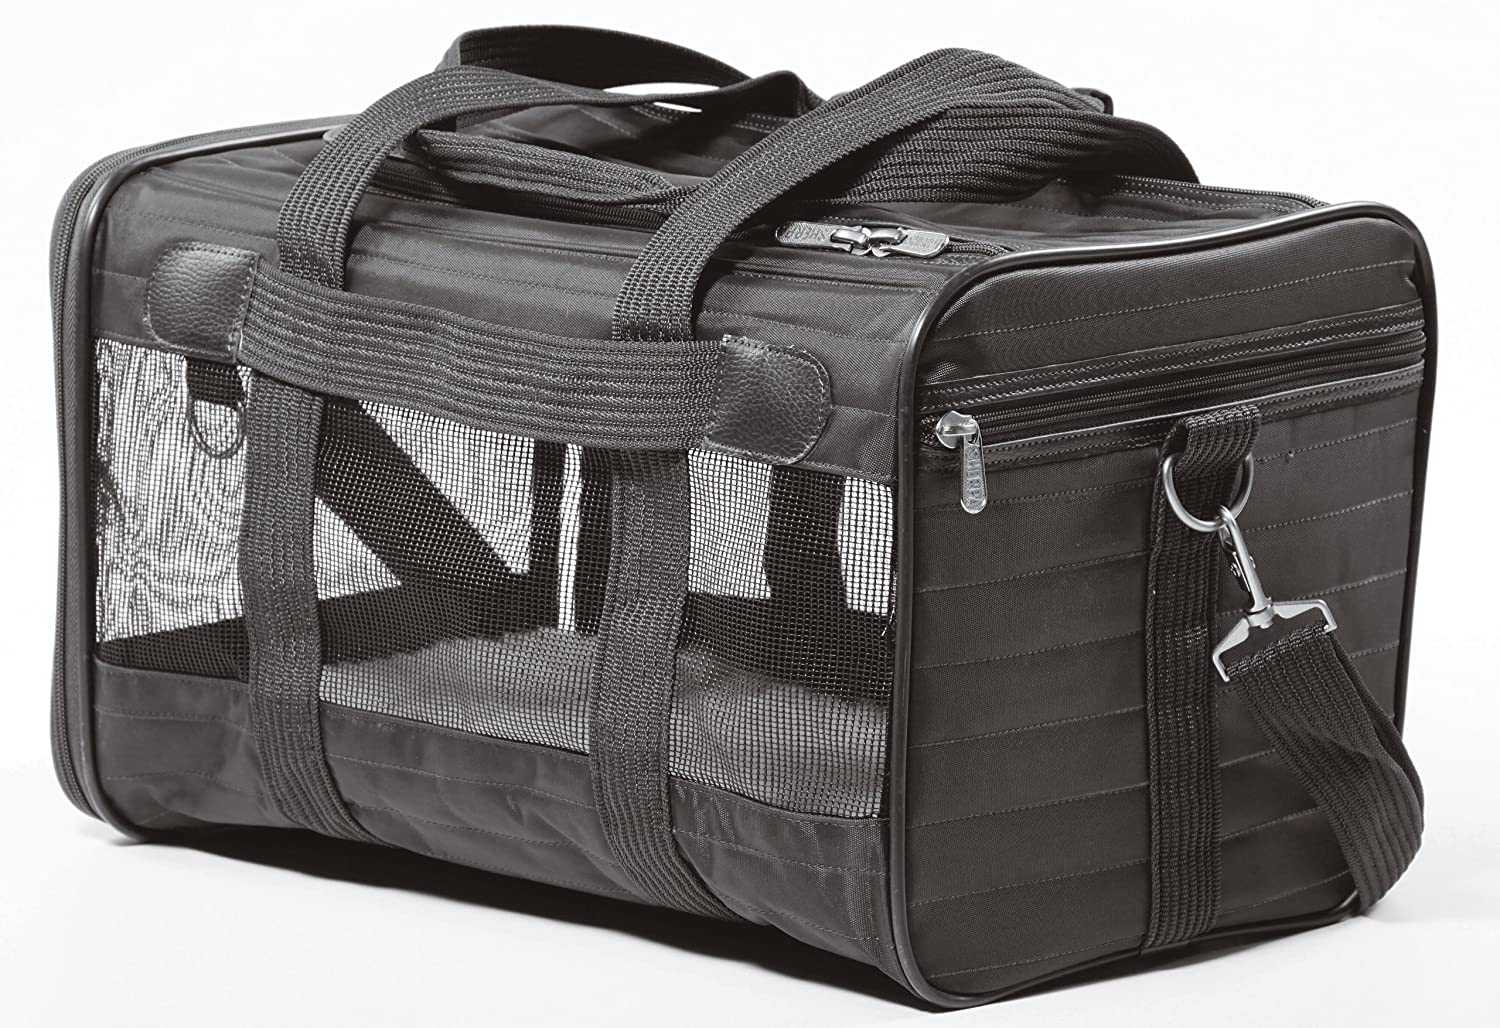 Sherpa Deluxe Travel Bag Pet Carrier